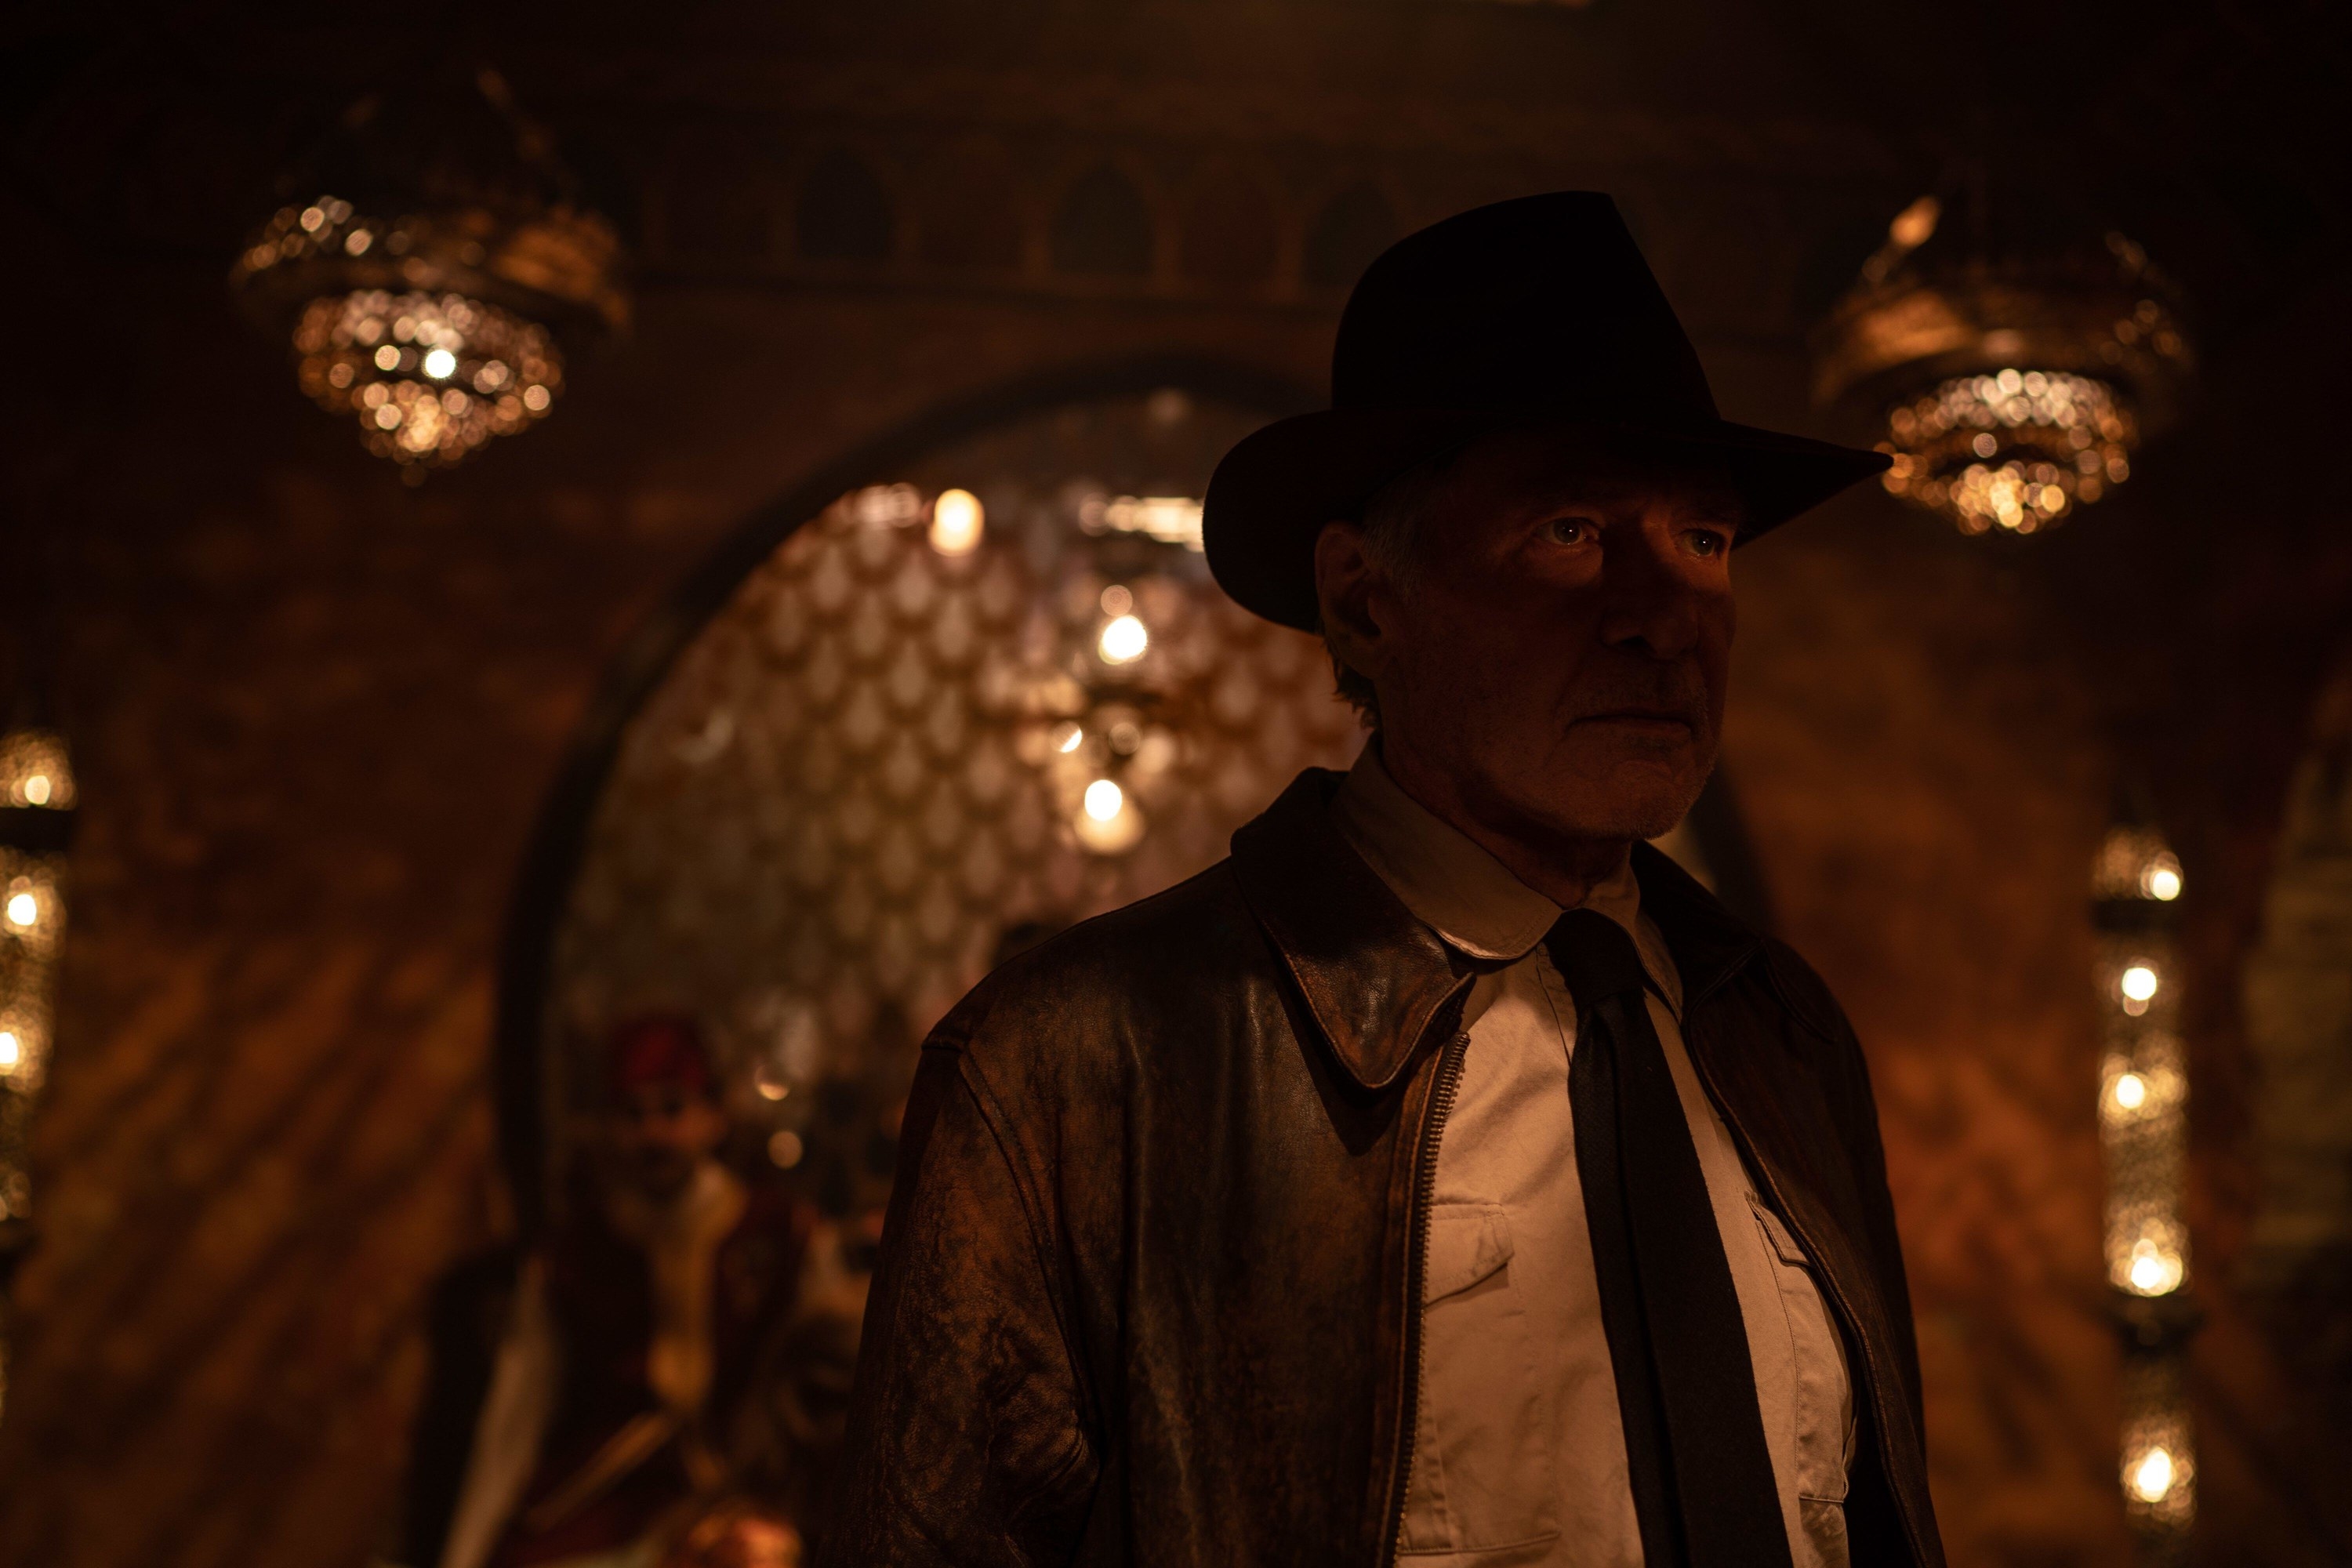 An older man in a hat and leather jacket enters a dimly lit room